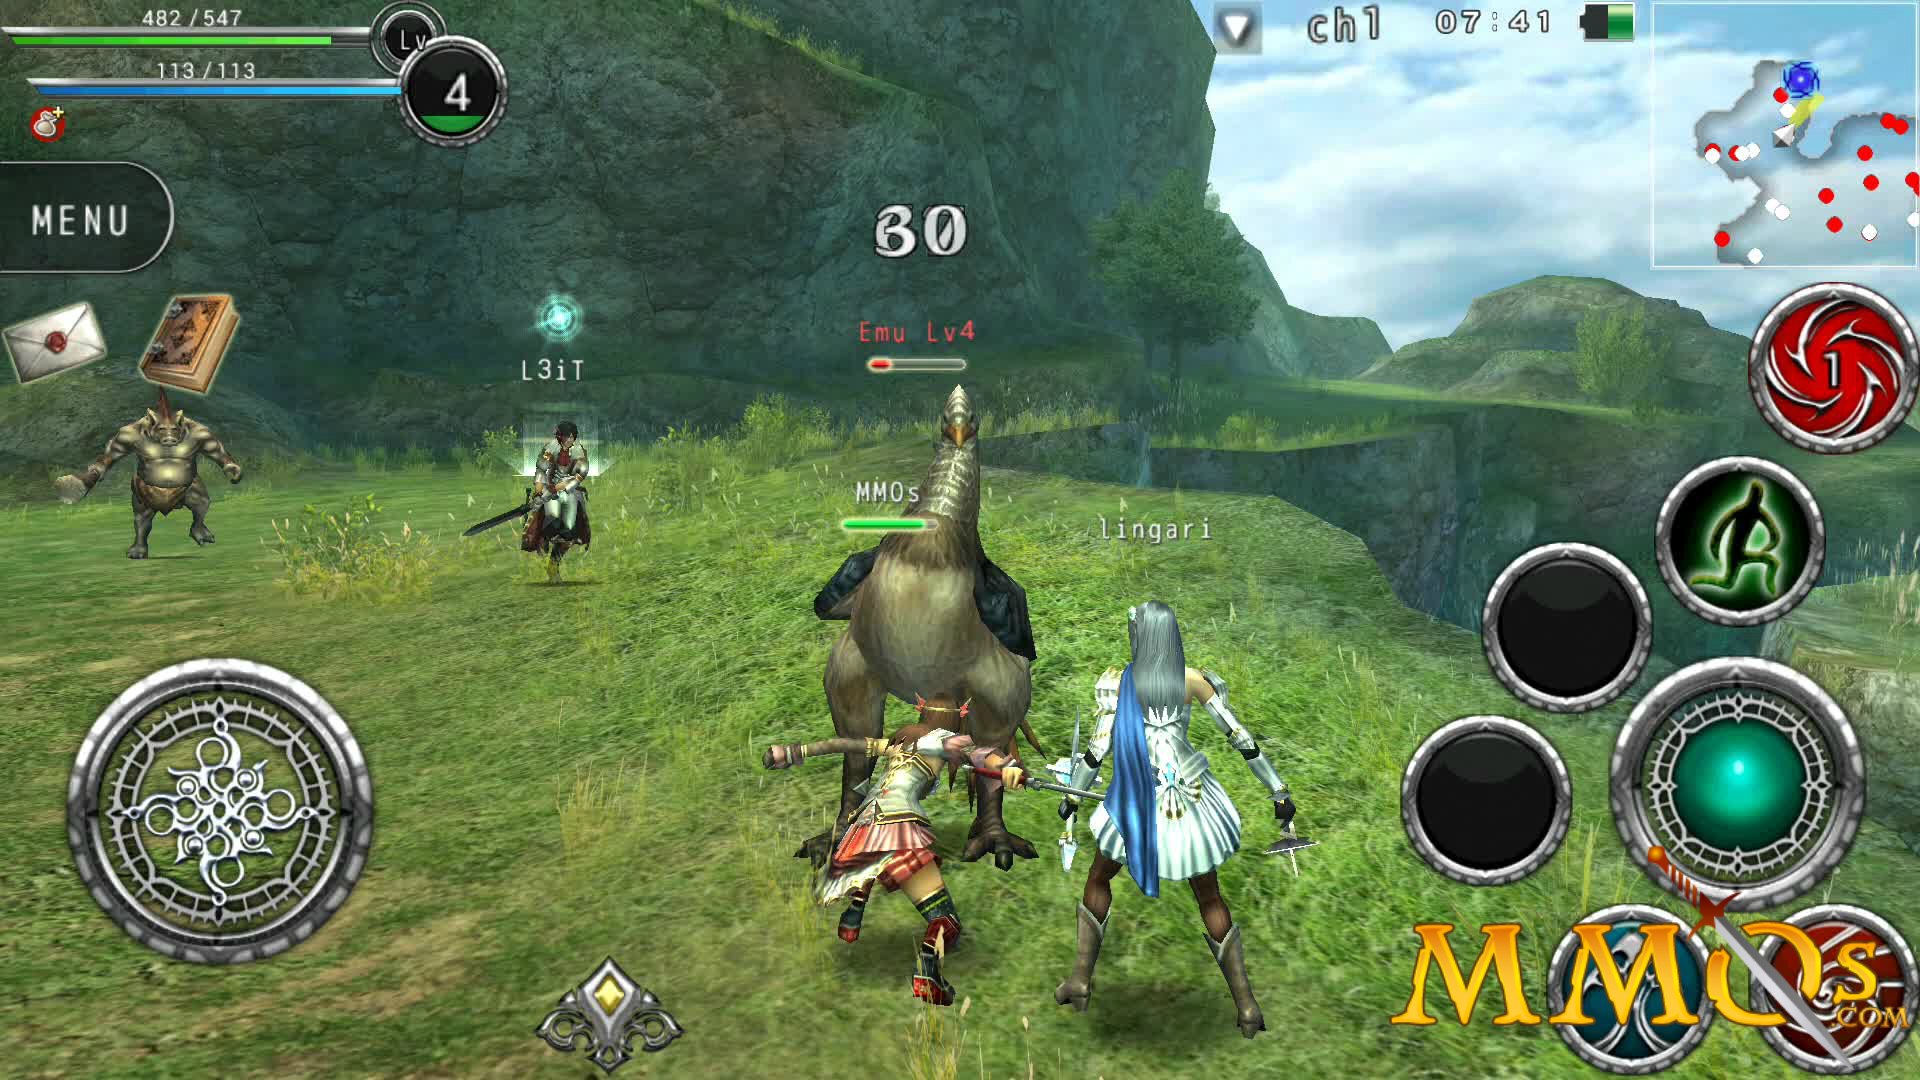 Start earning money by playing MMO games on android